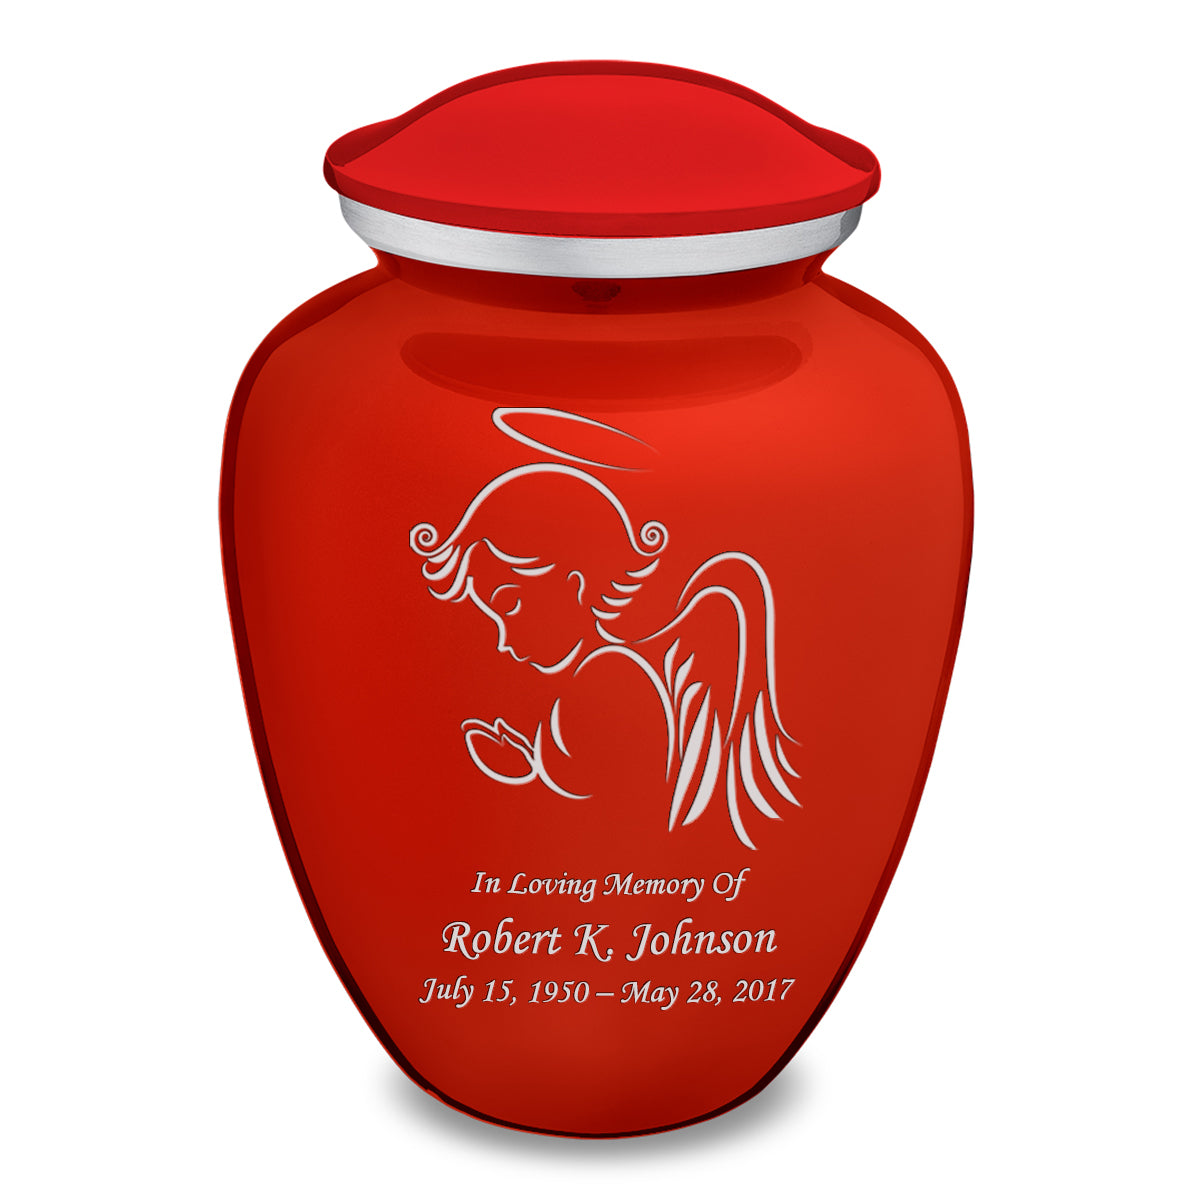 Adult Embrace Bright Red Angel Cremation Urn